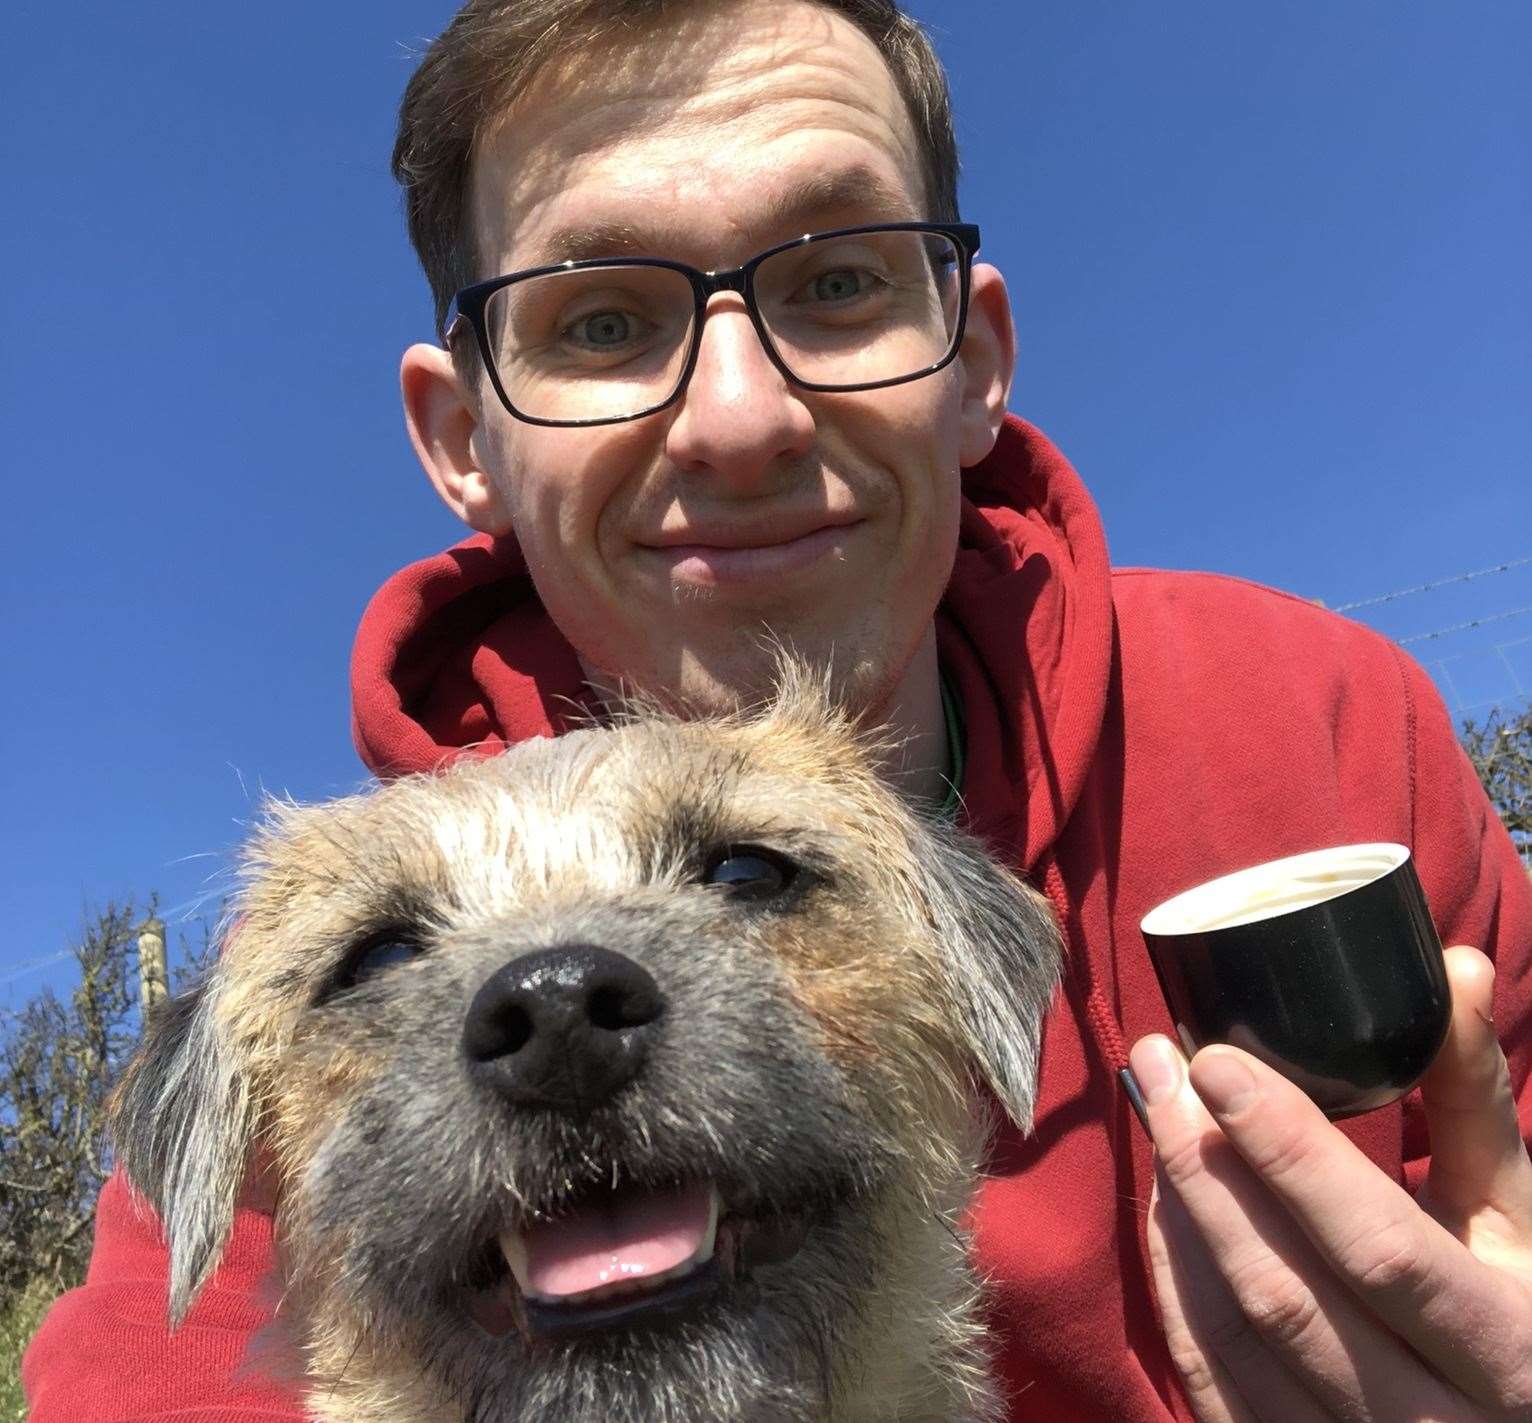 Border Terrier Millie needed emergency treatment after eating a mouldy sausage. With owner Jakub Ovecka. All photos: Vets Now